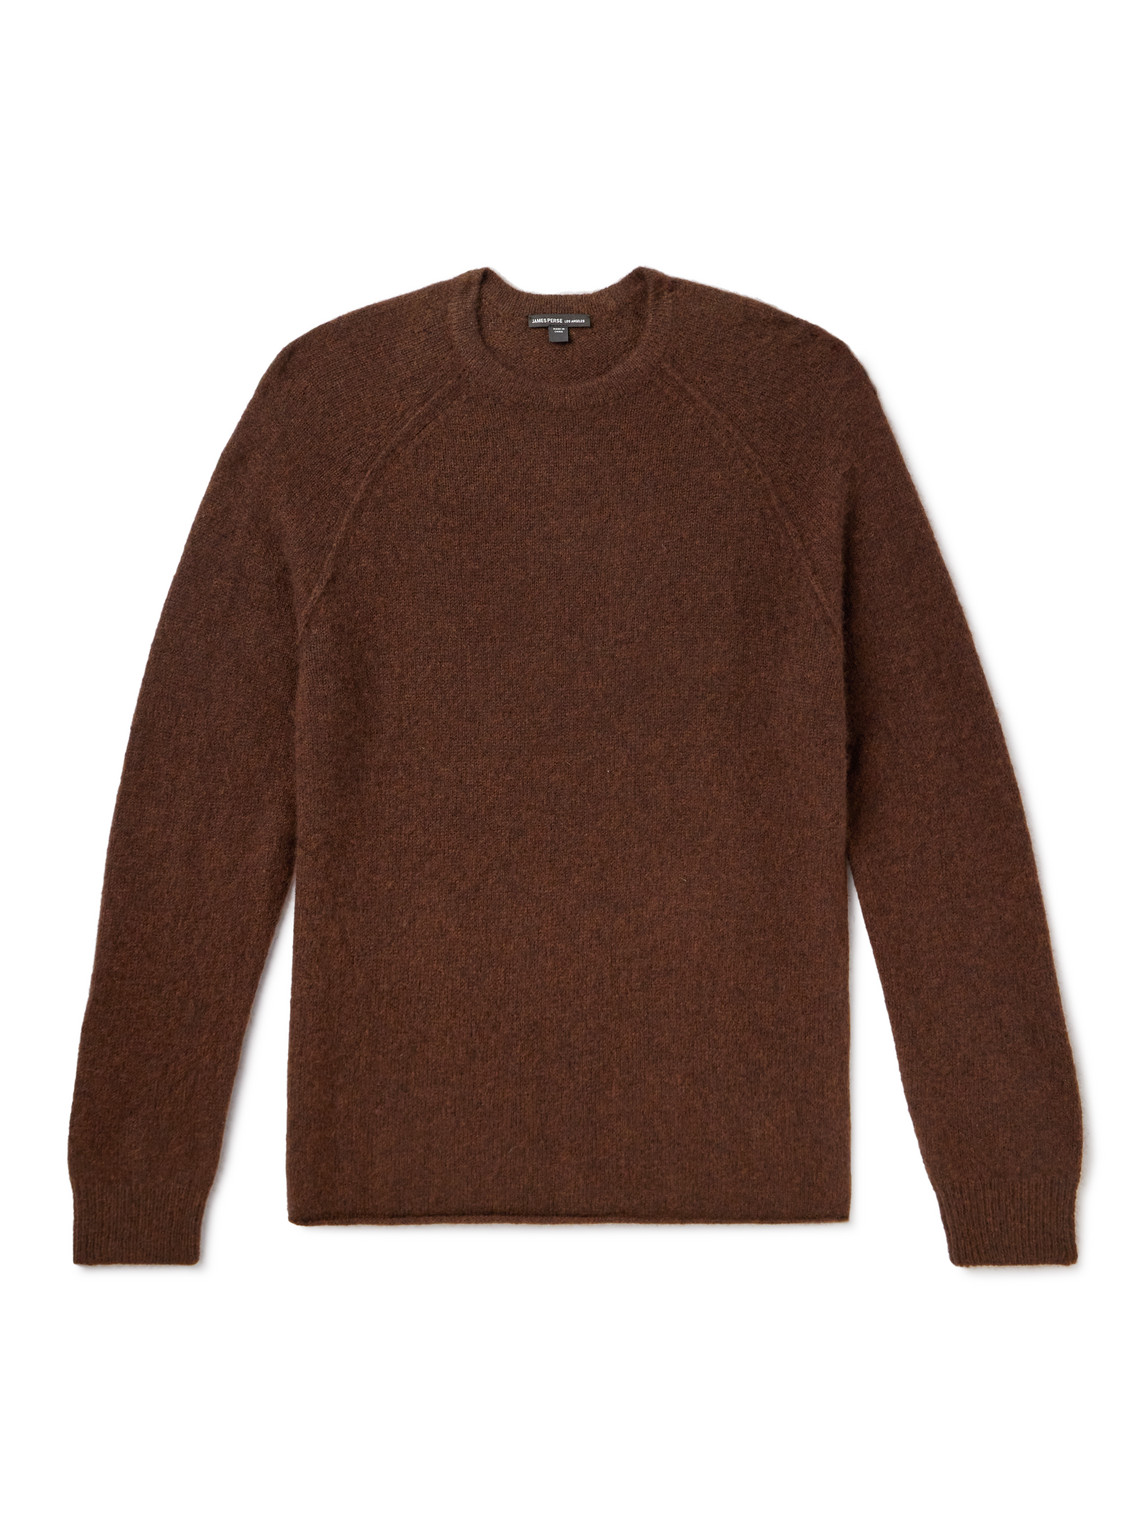 James Perse Cashmere Sweater In Brown